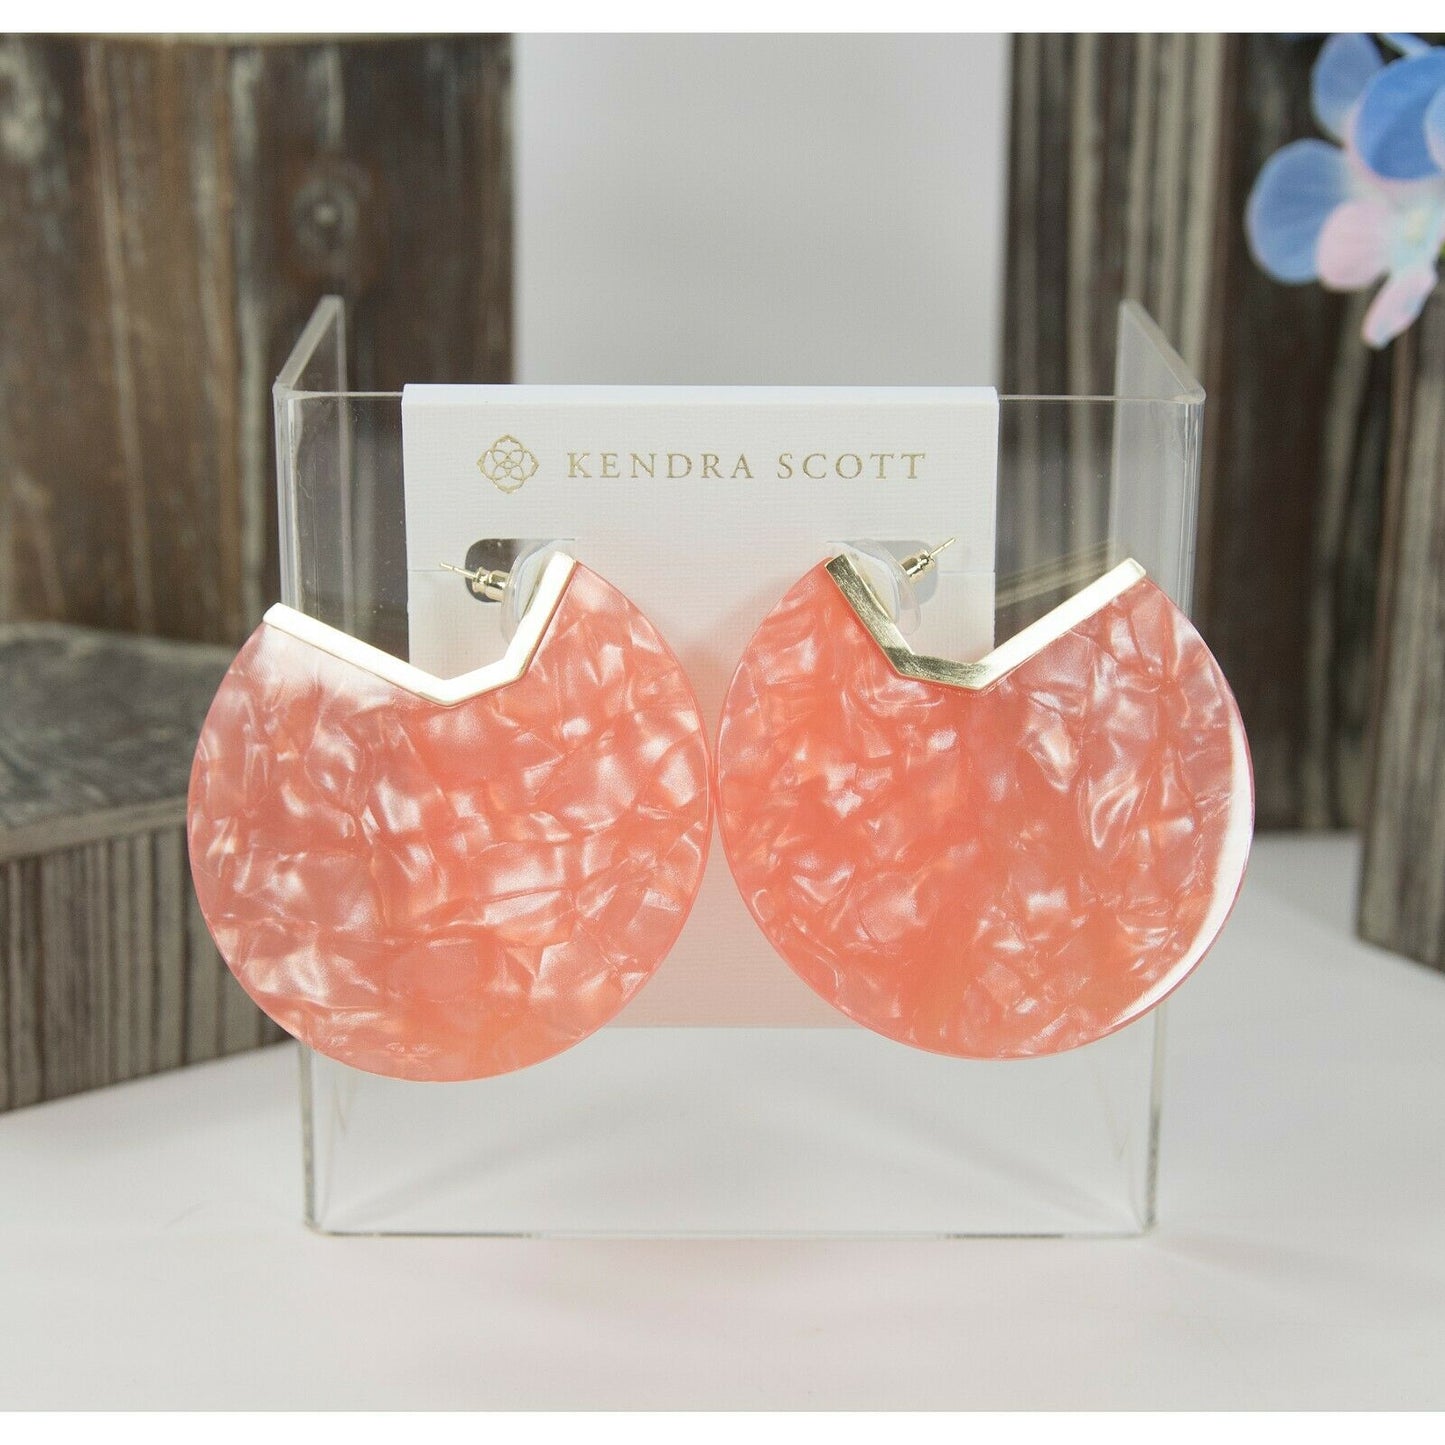 Kendra Scott Kai Peach Mother of Pearl Gold Extra Large Drop Earrings NWT